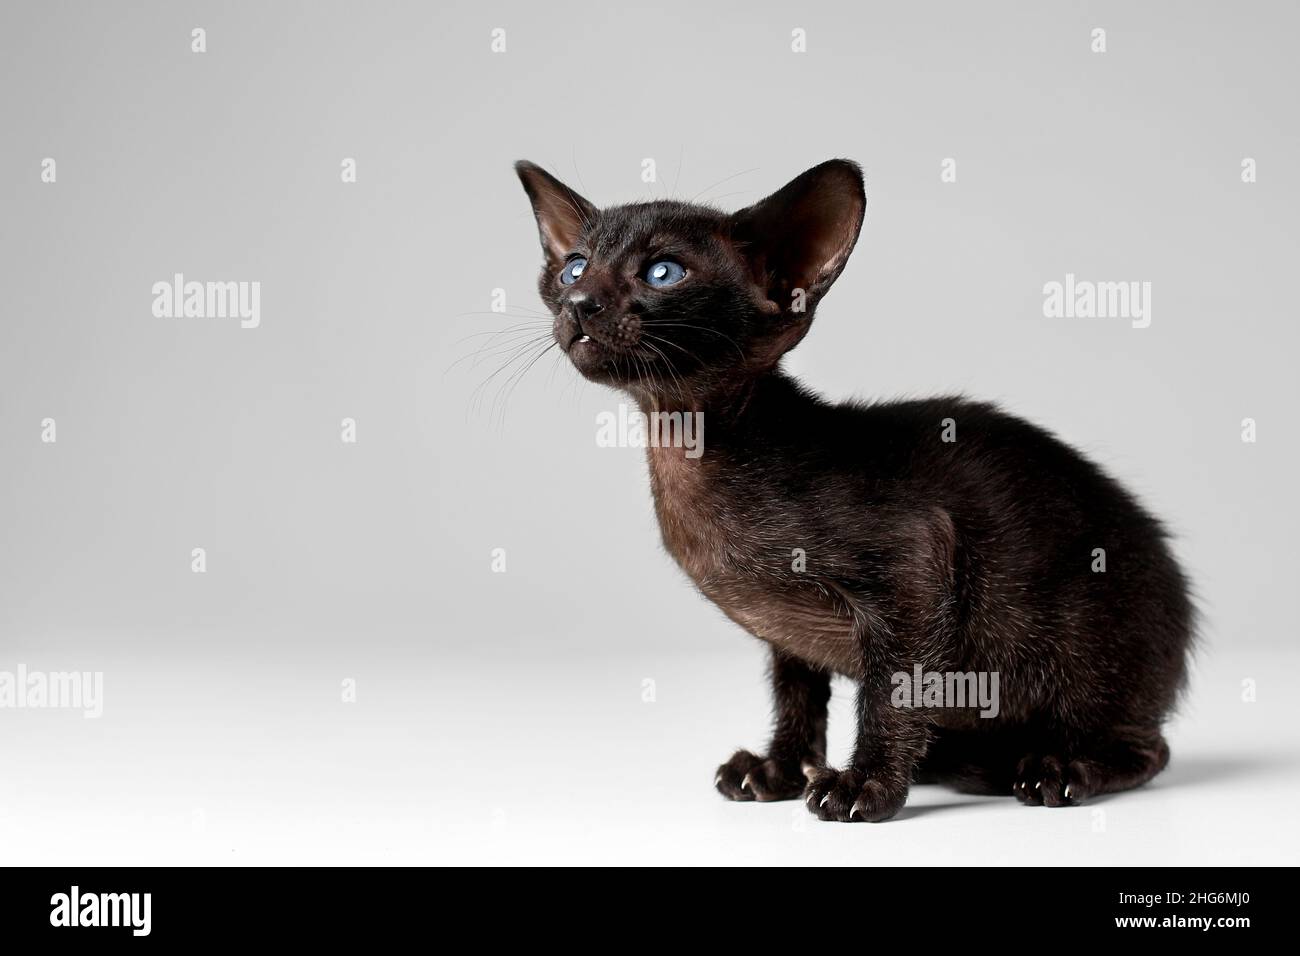 Oriental black kitten with blue eyes isolated against gray background Stock Photo